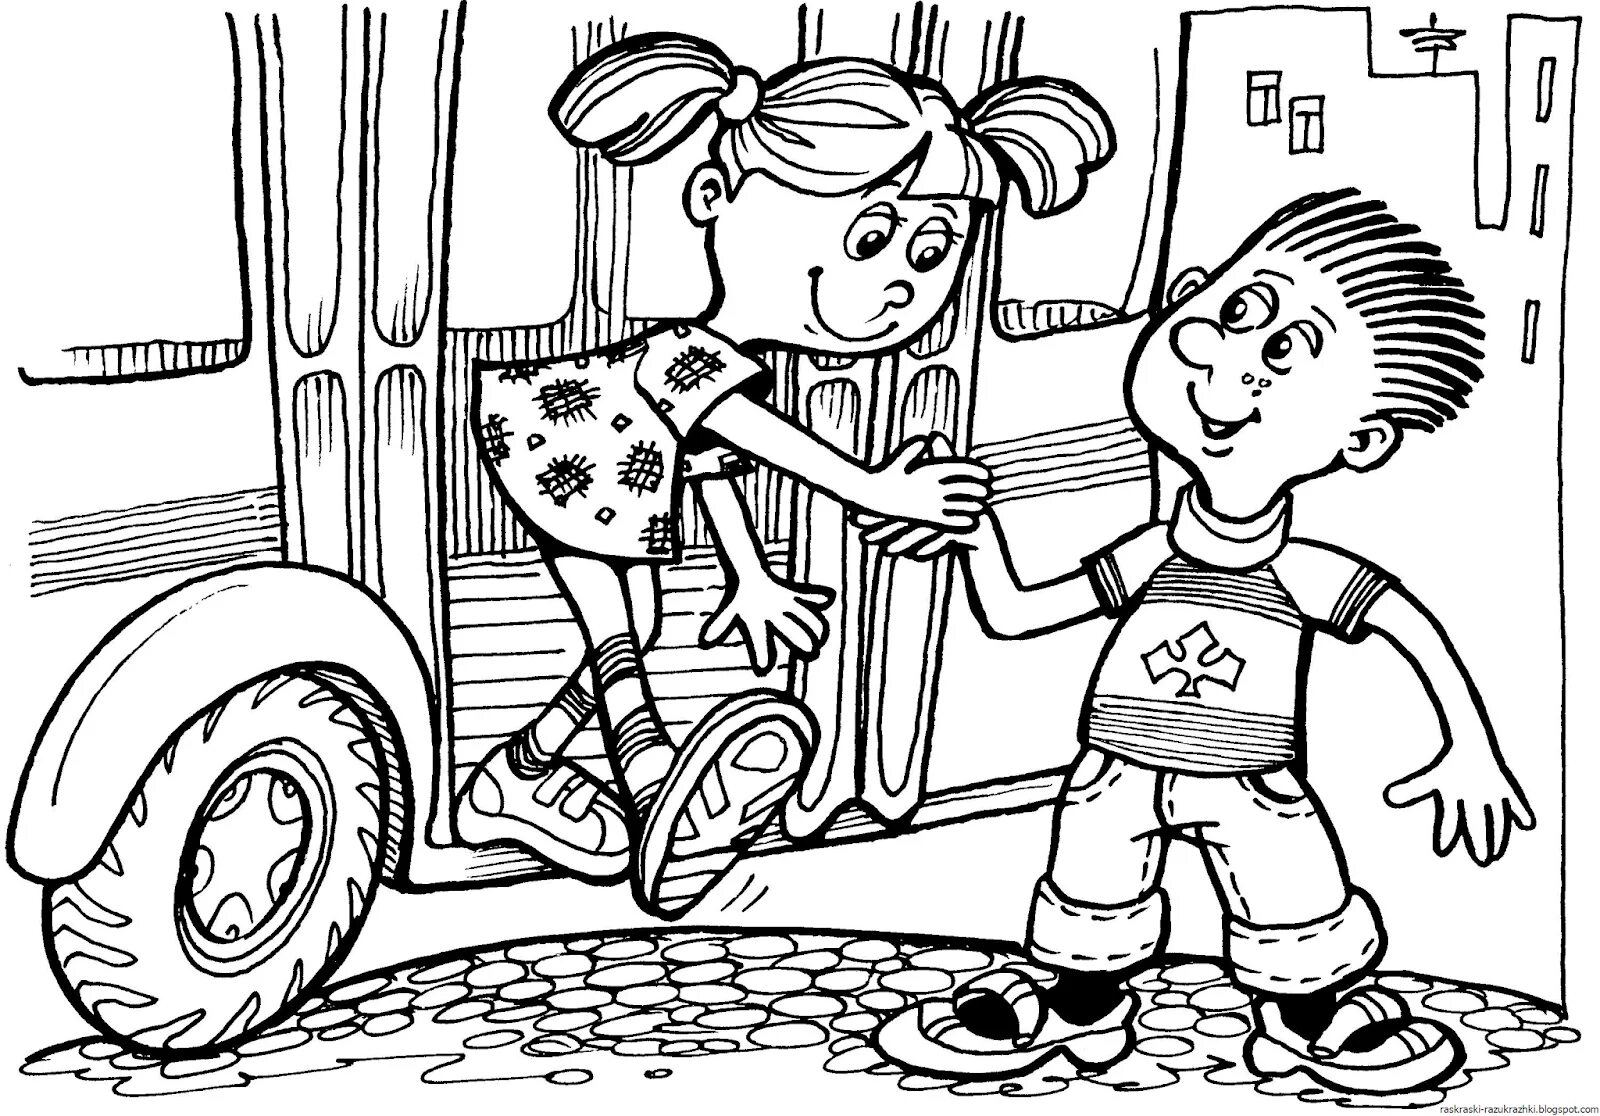 Coloring page gentle courtesy